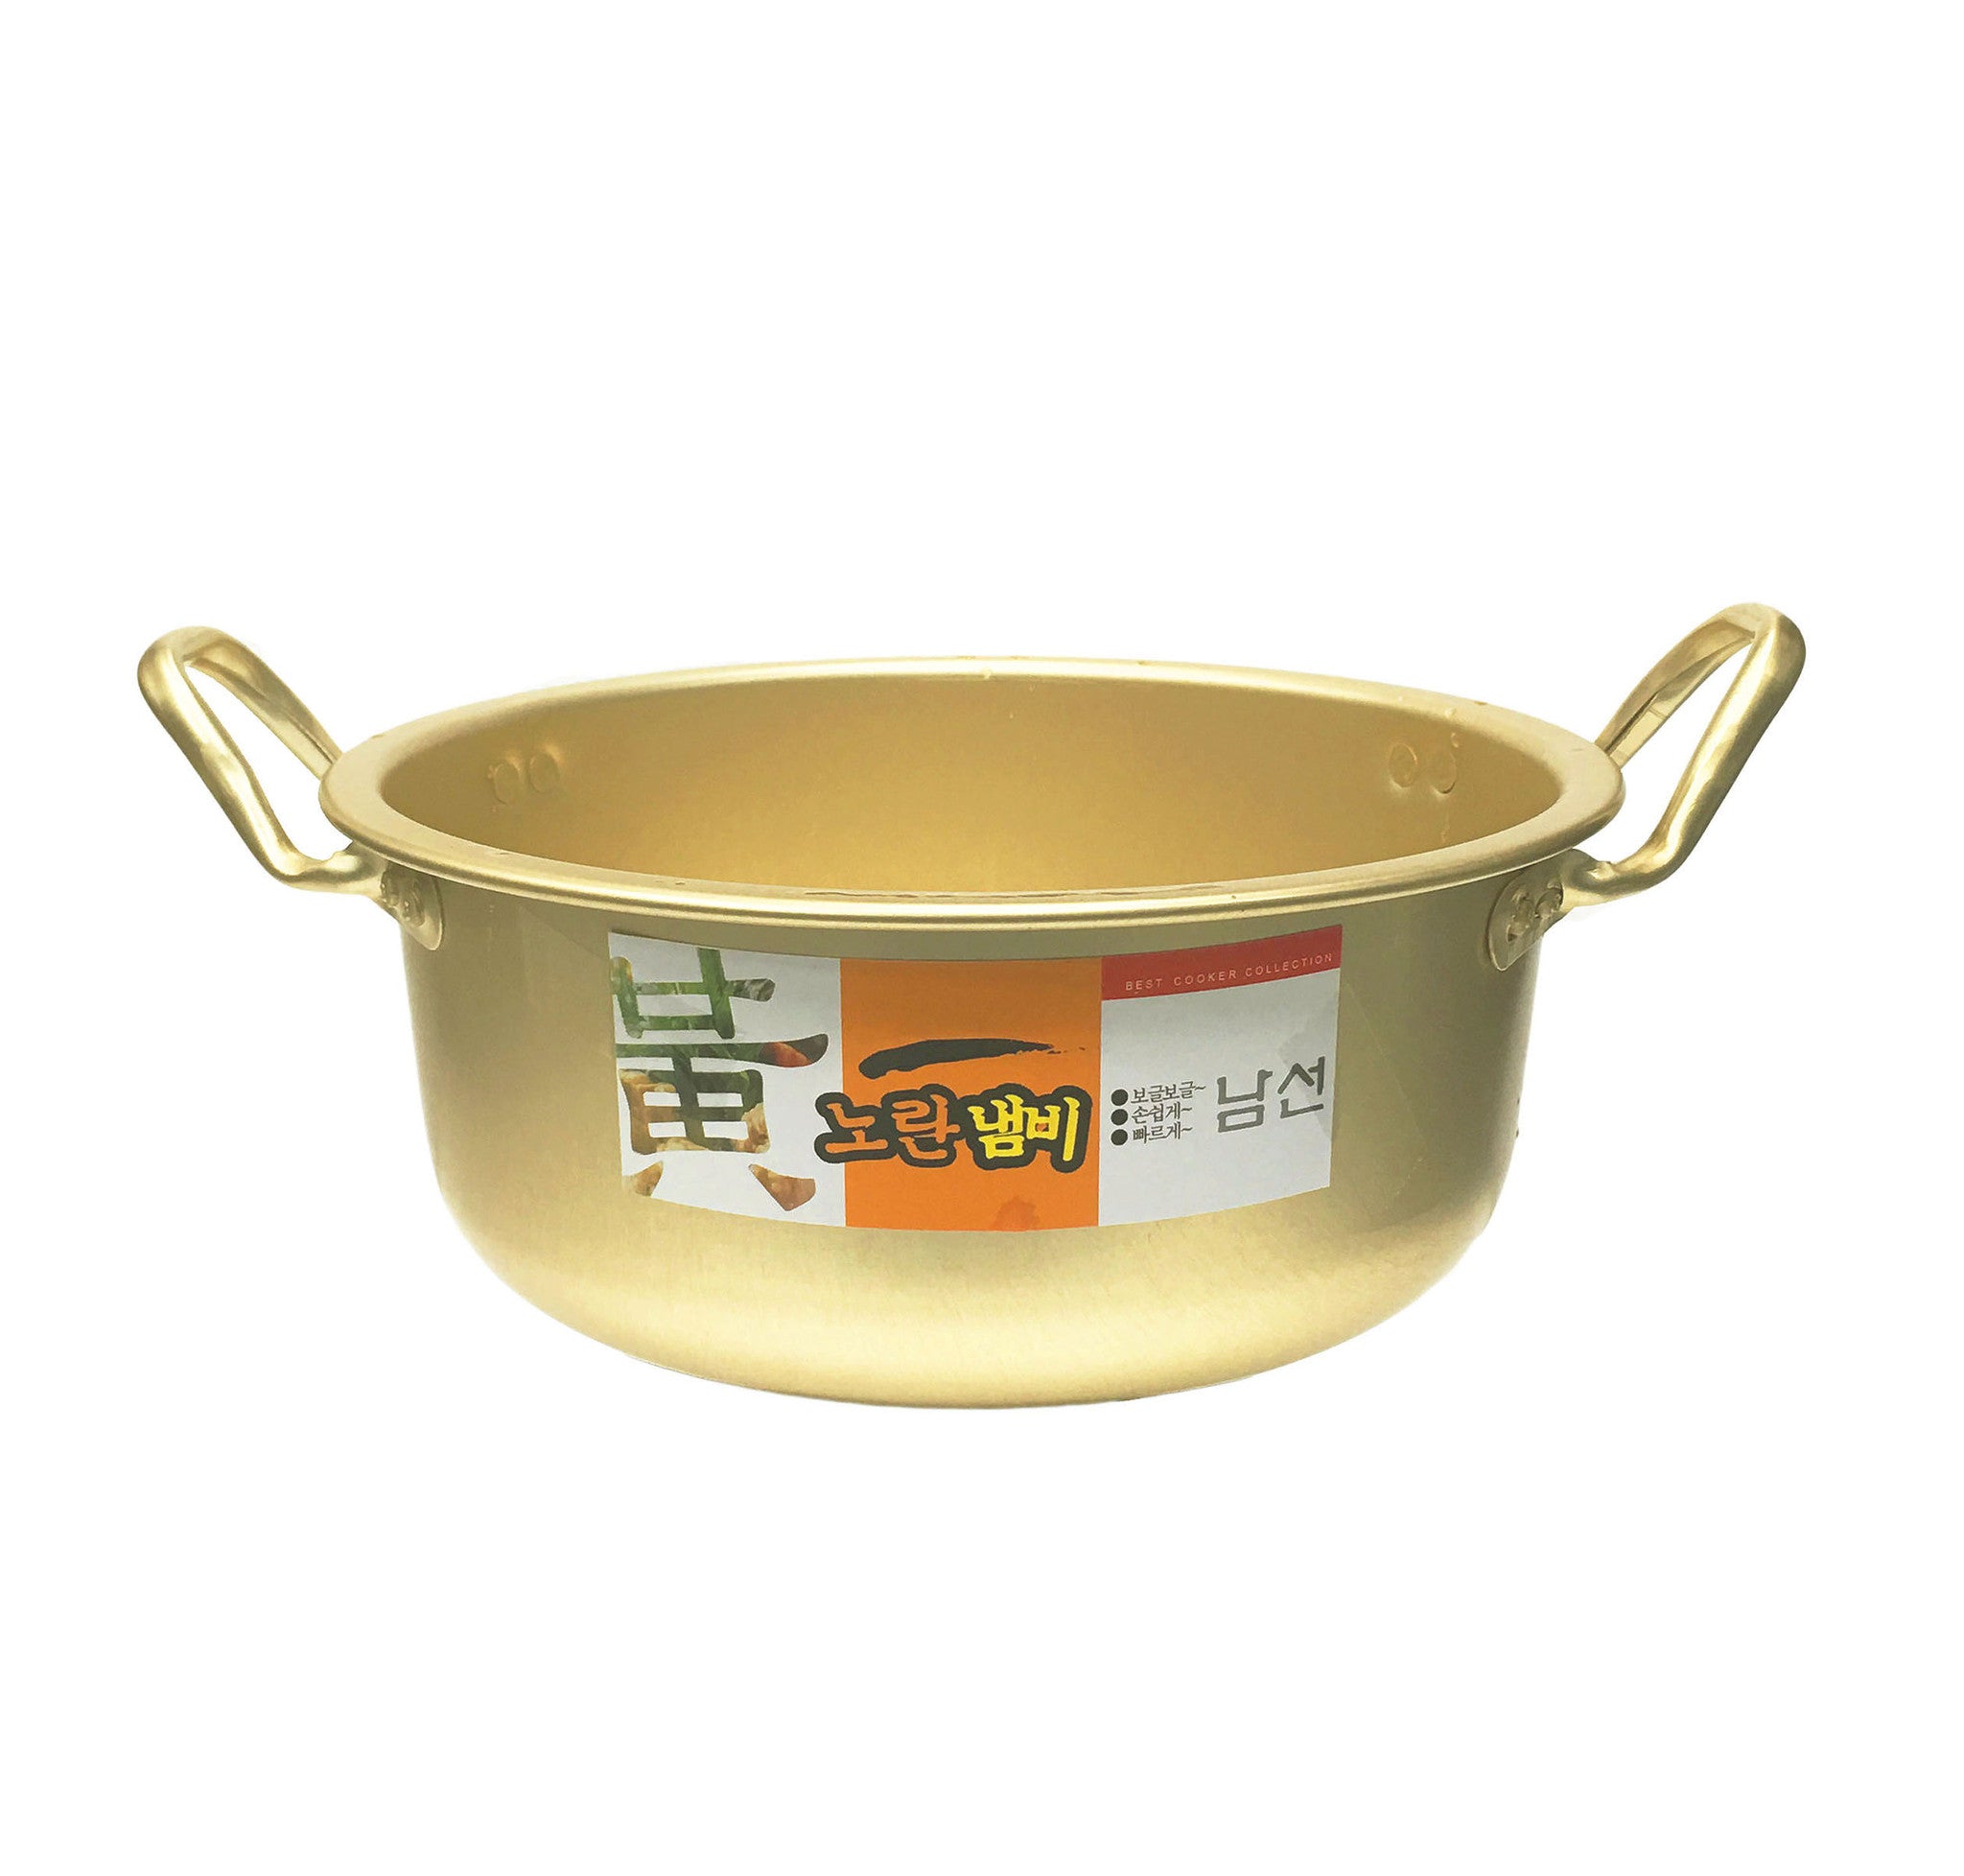 high quality yellow color aluminum cooking